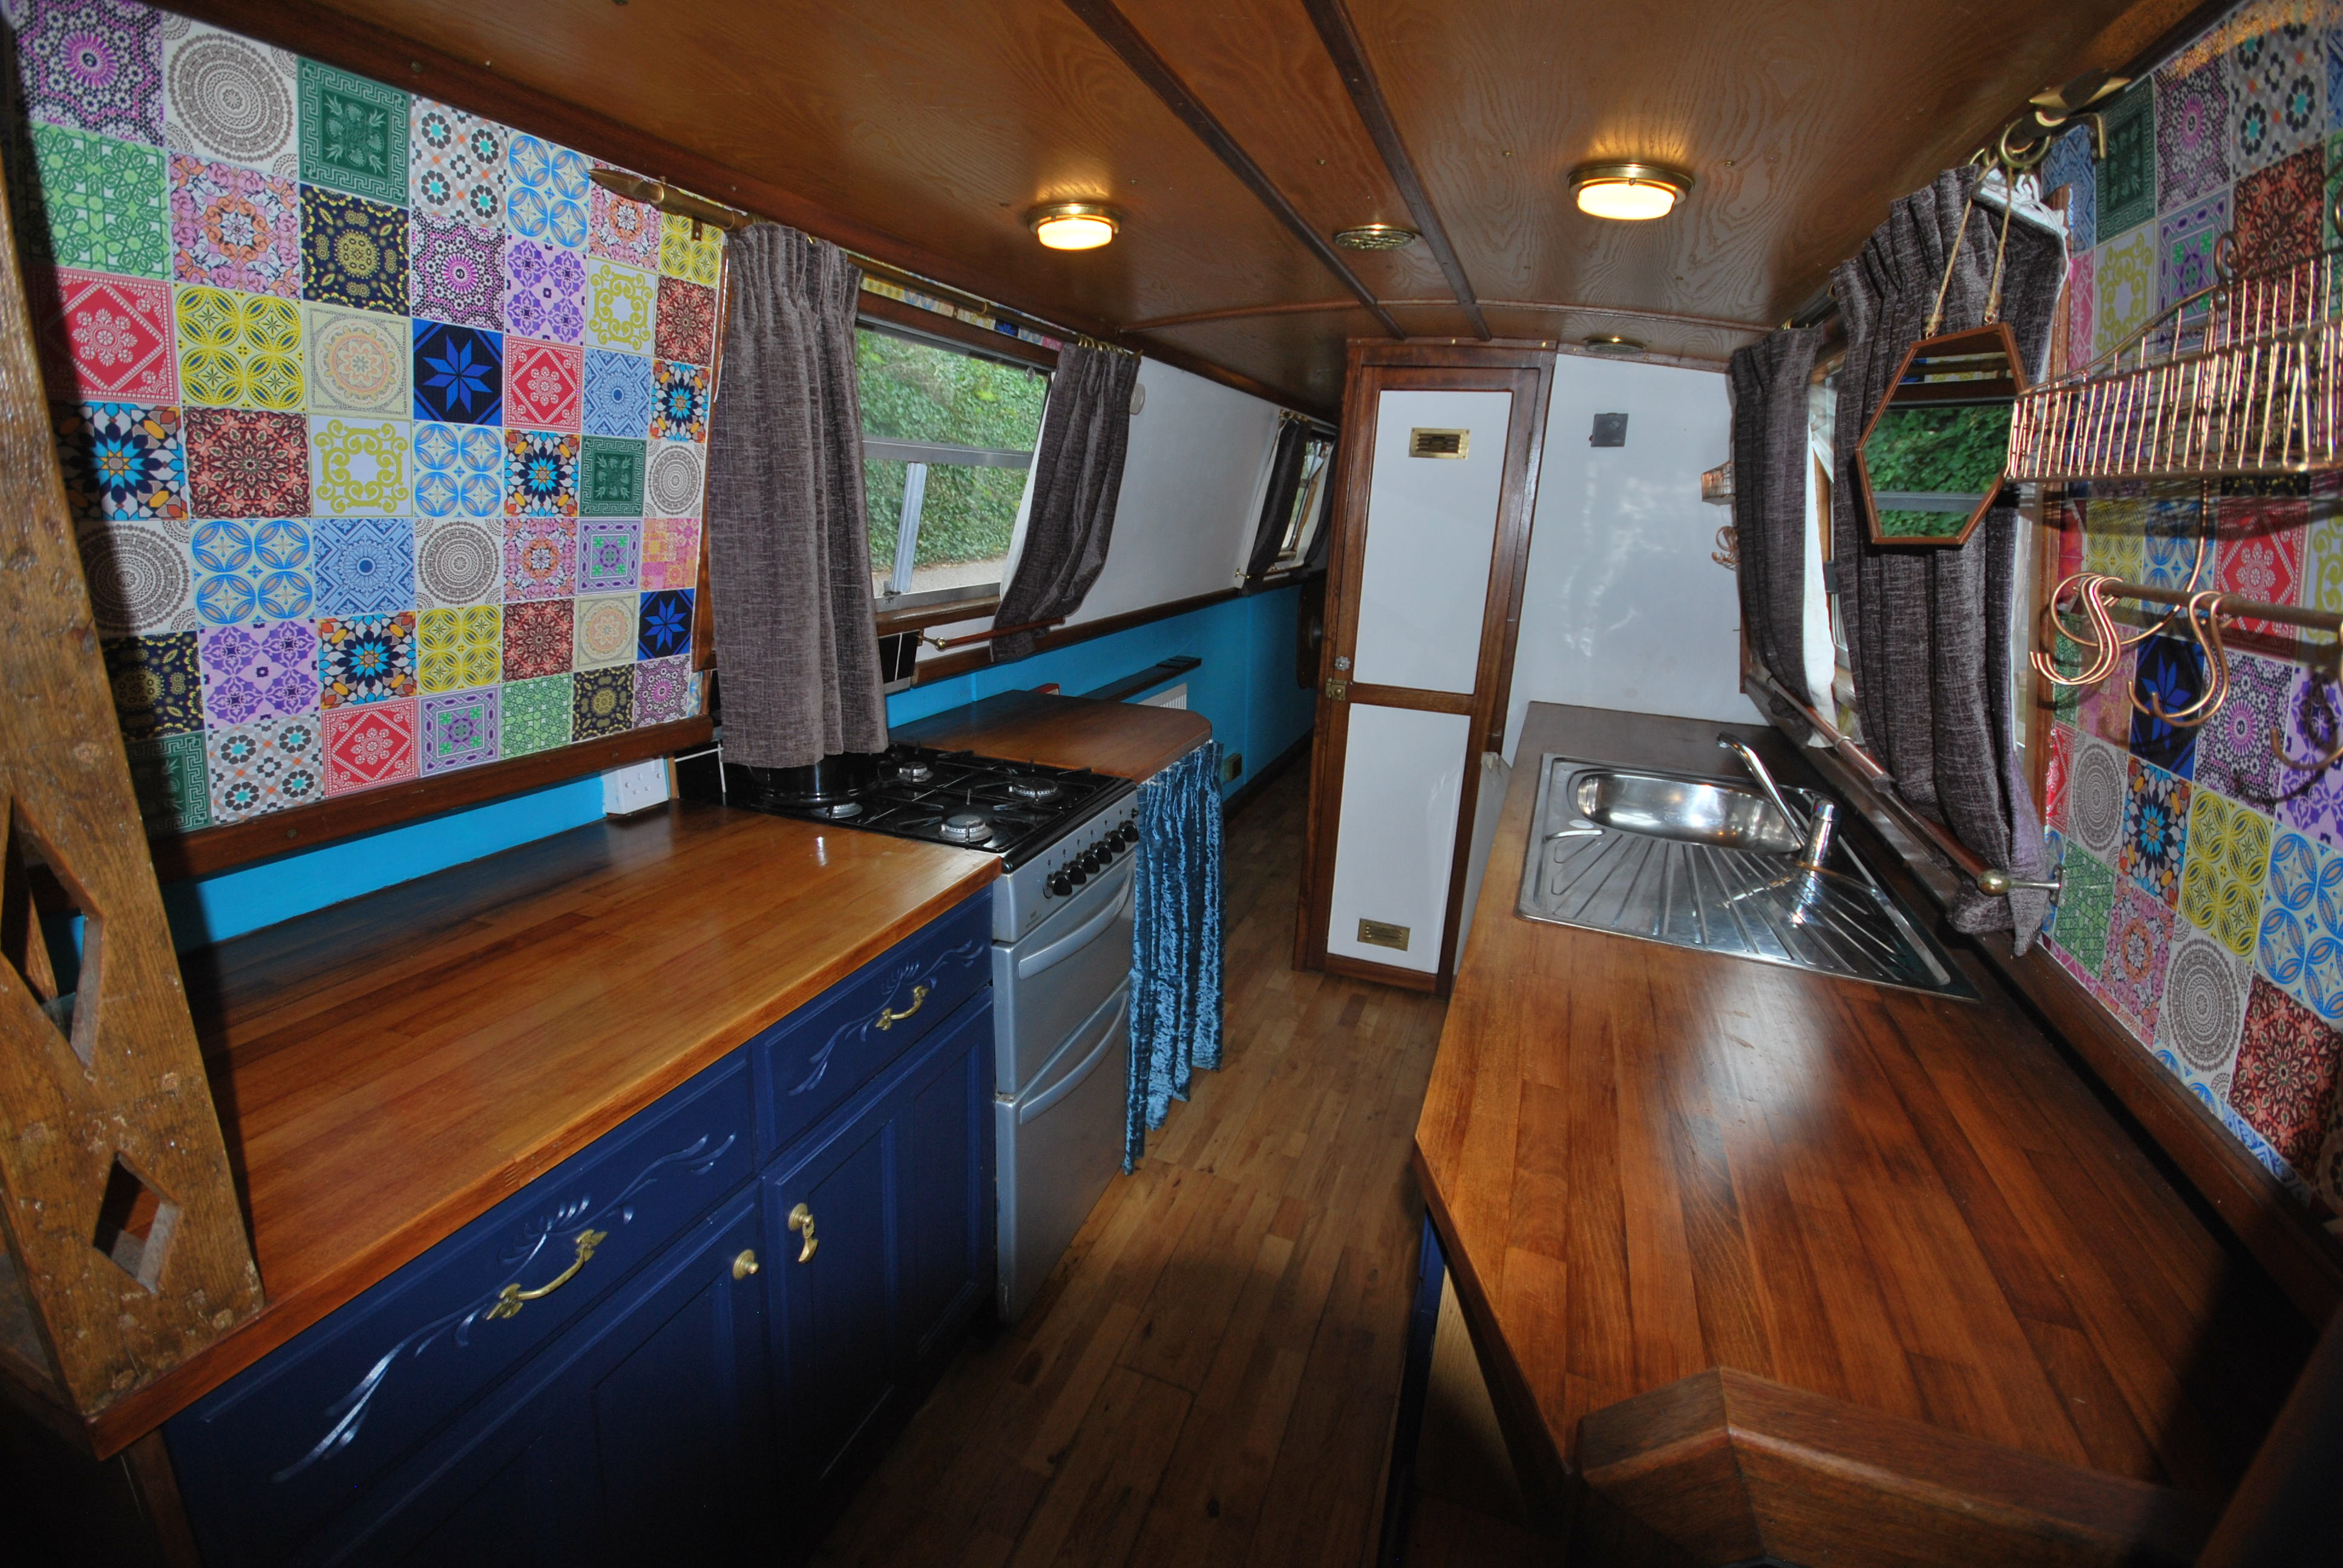 Luvly Jubbly - 56ft Cruiser Stern Liveaboard Narrowboat - For Sale 13